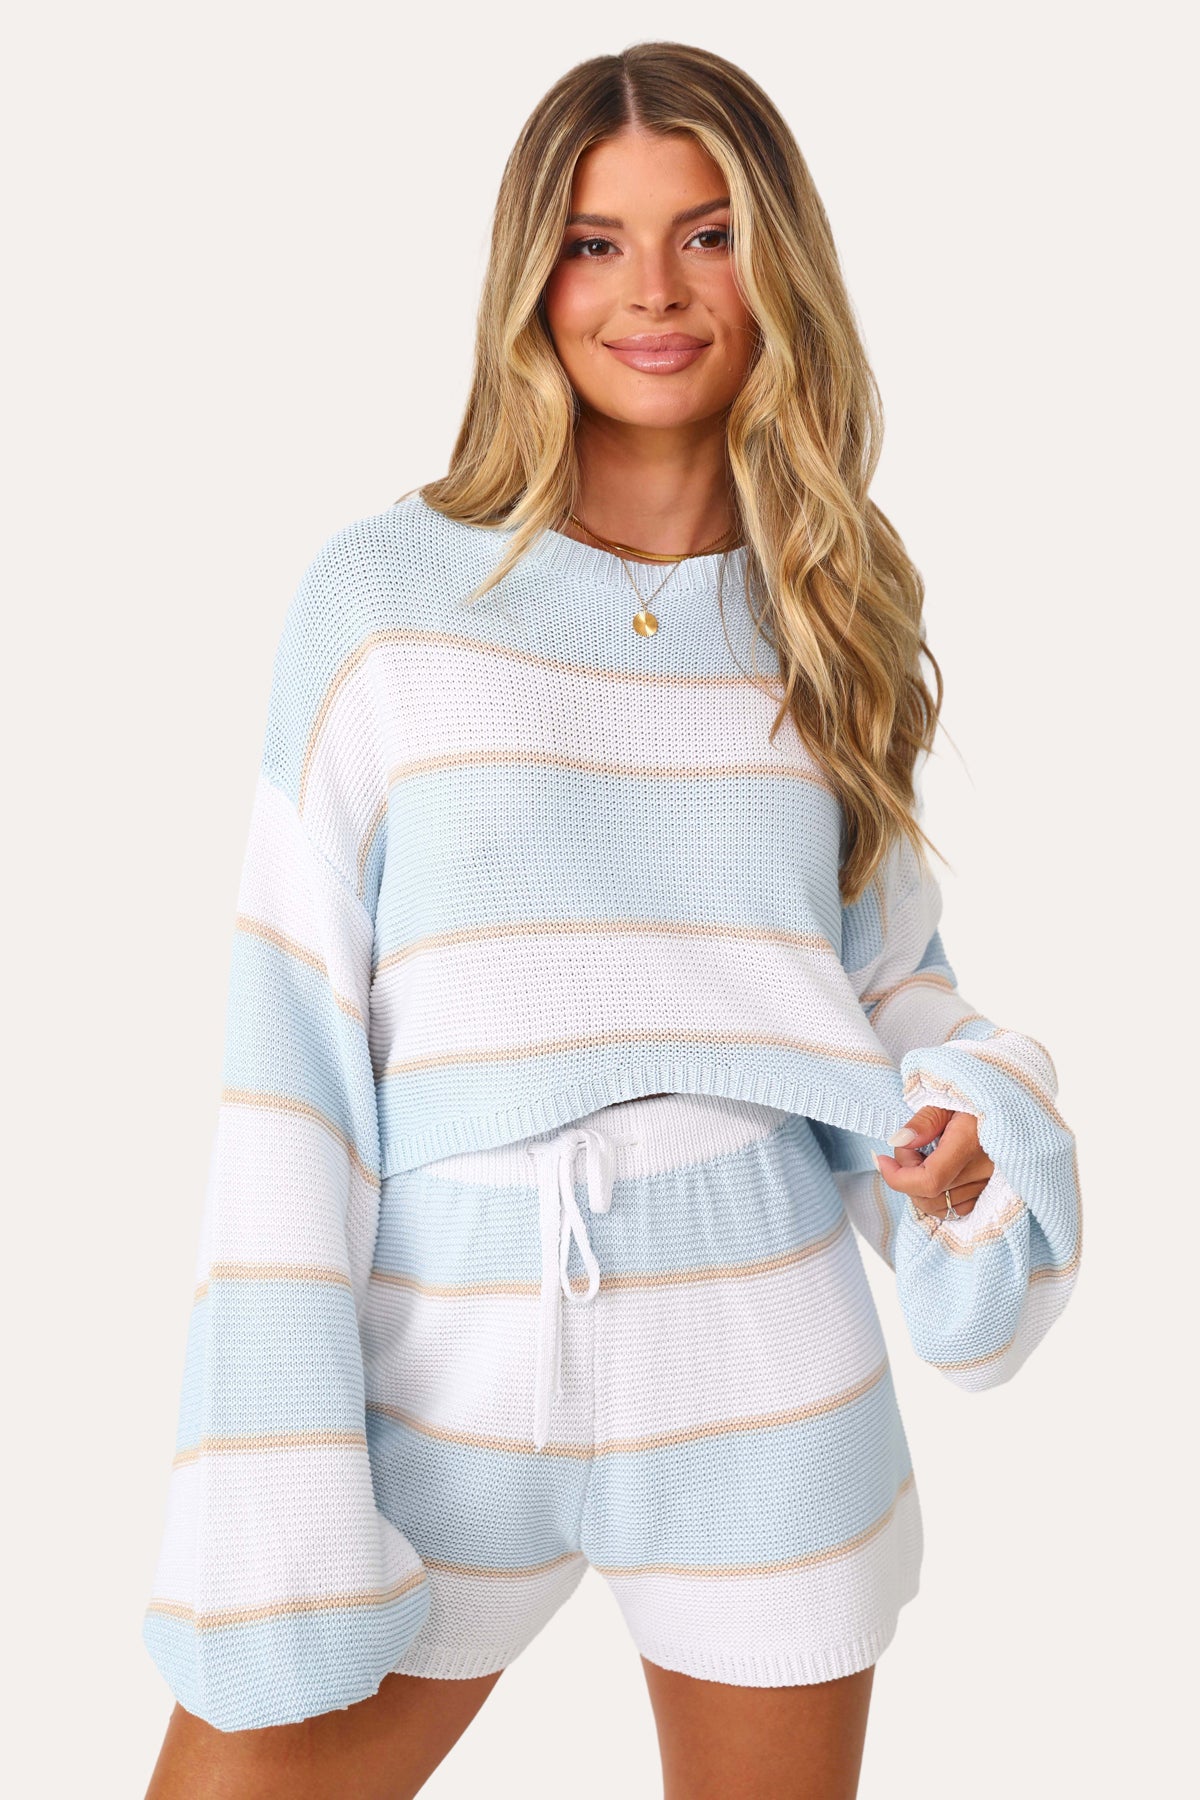 Model wearing the Just Relax knit stripe sweater.